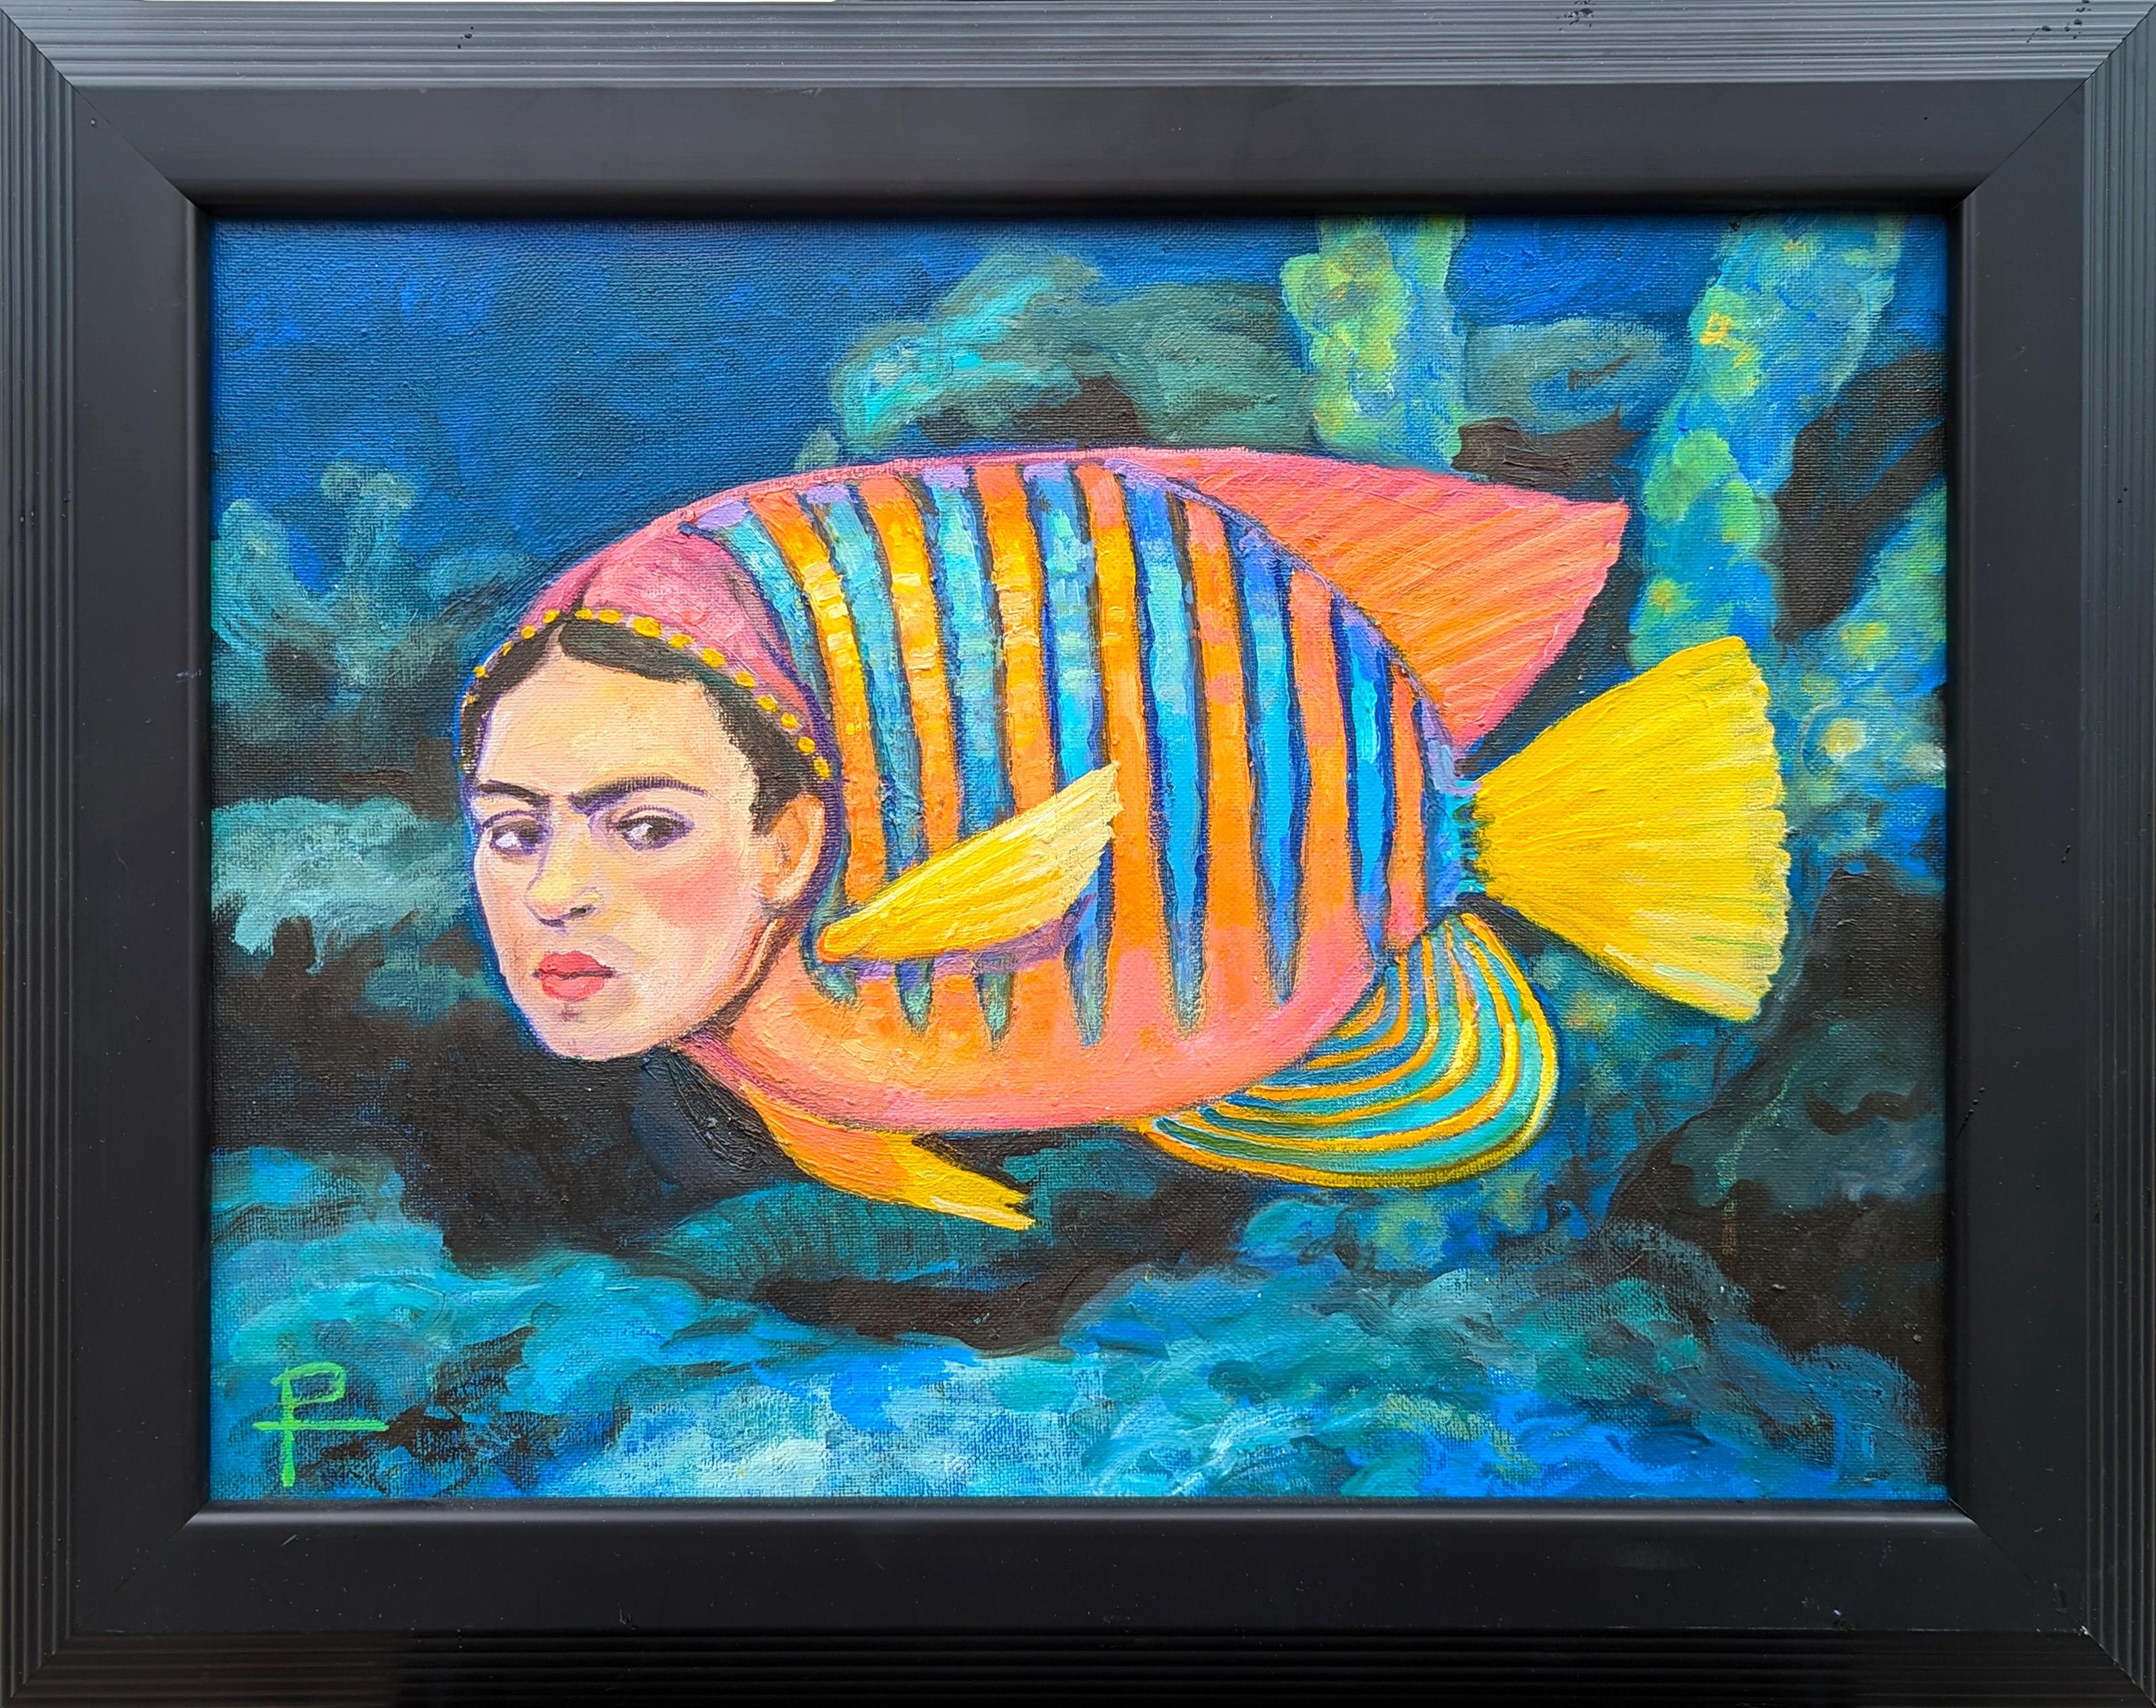 Henry David Potwin Landscape Painting – "Frida Fish" Contemporary Surrealist Jewel Toned Tropical Ocean Life Painting